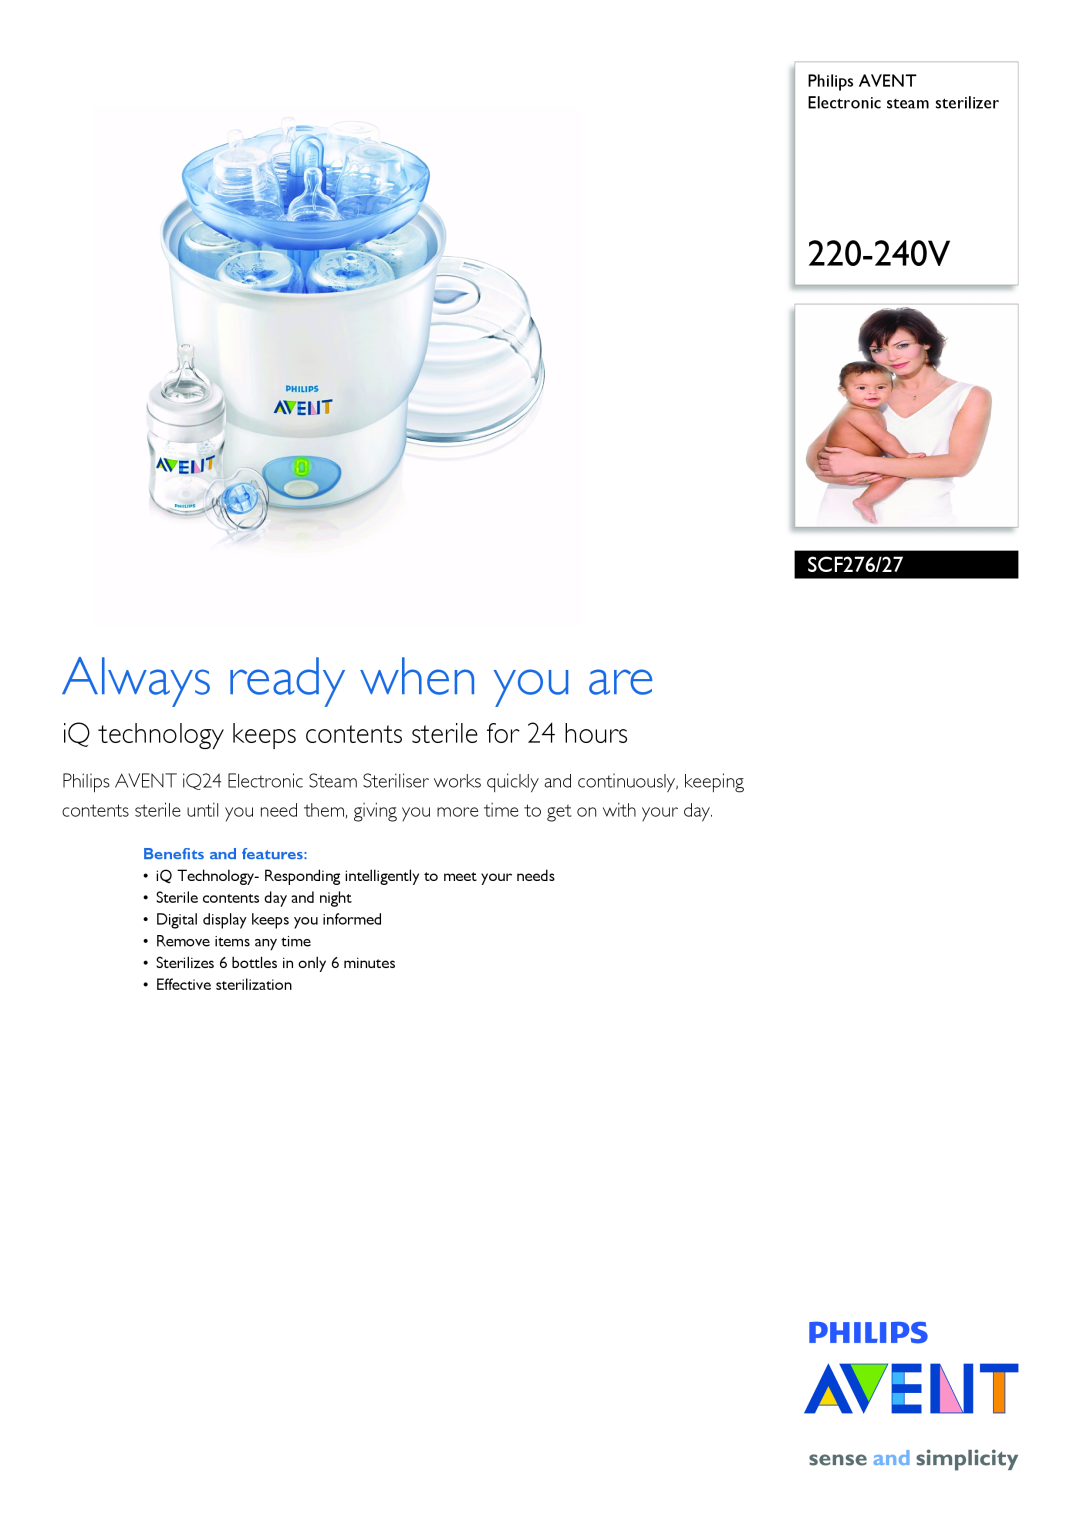 Philips SCF276/27 manual Philips AVENT Electronic steam sterilizer, Benefits and features, Always ready when you are 